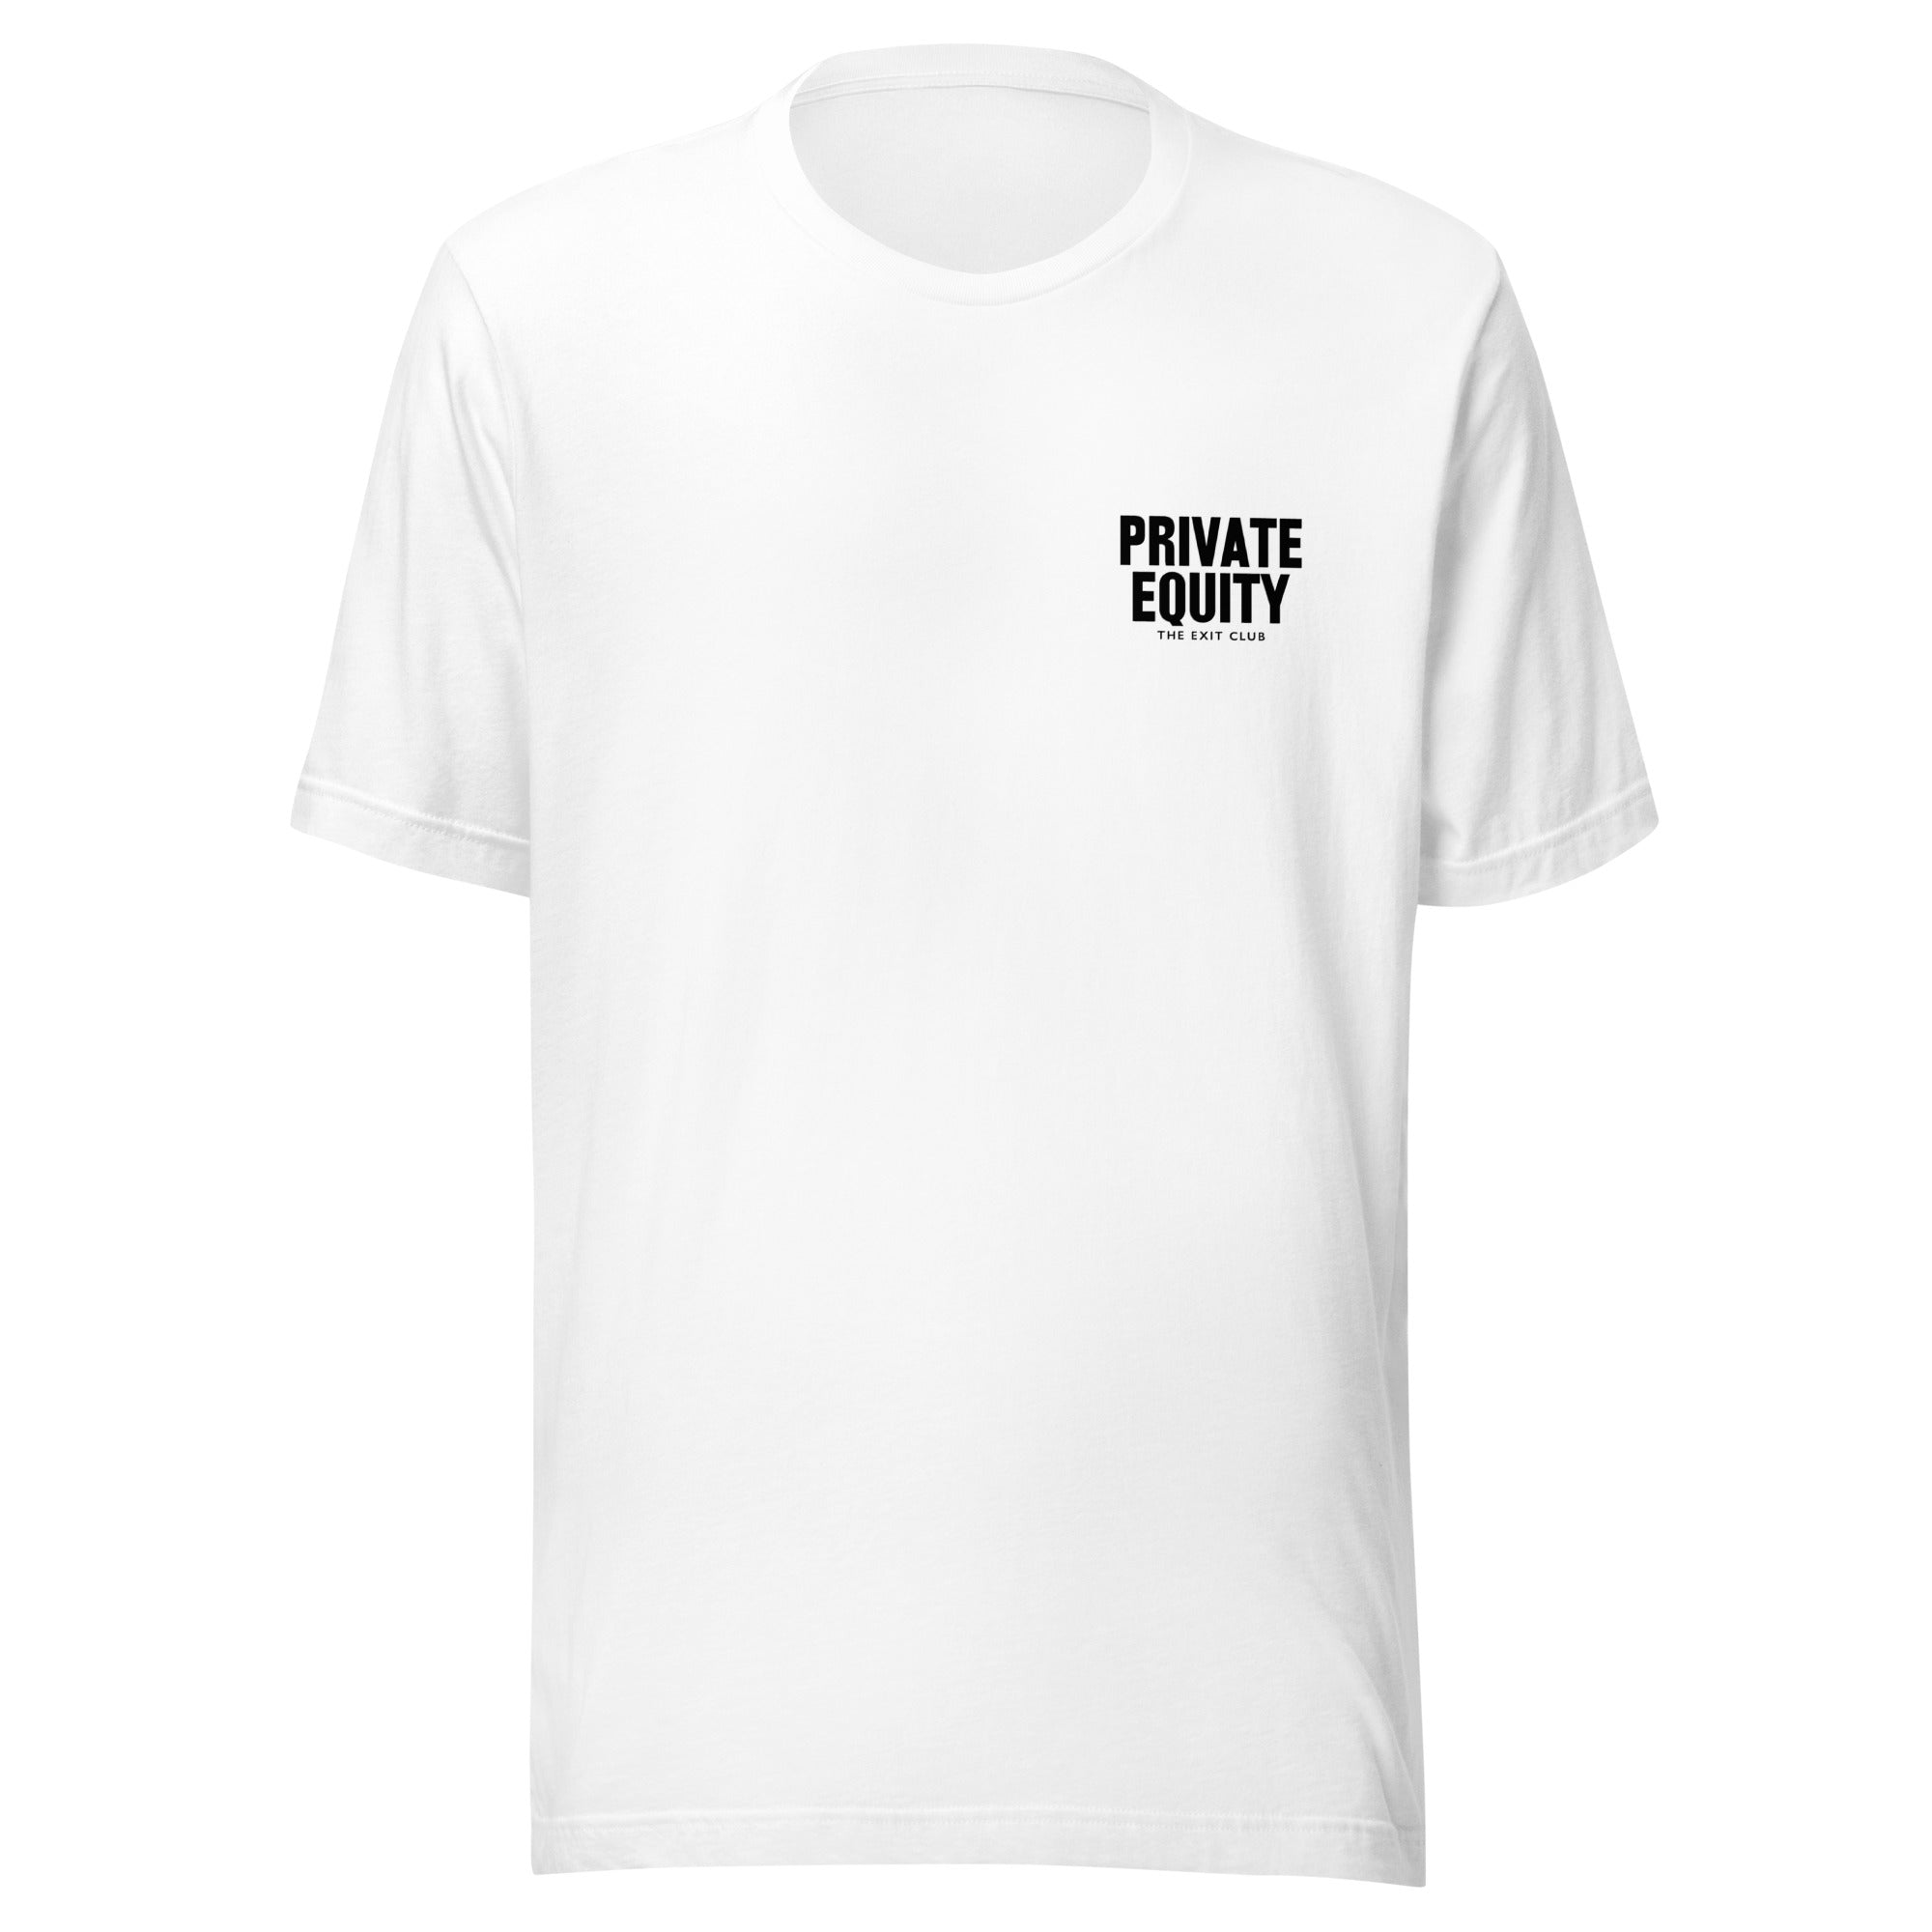 PRIVATE EQUITY T-SHIRT